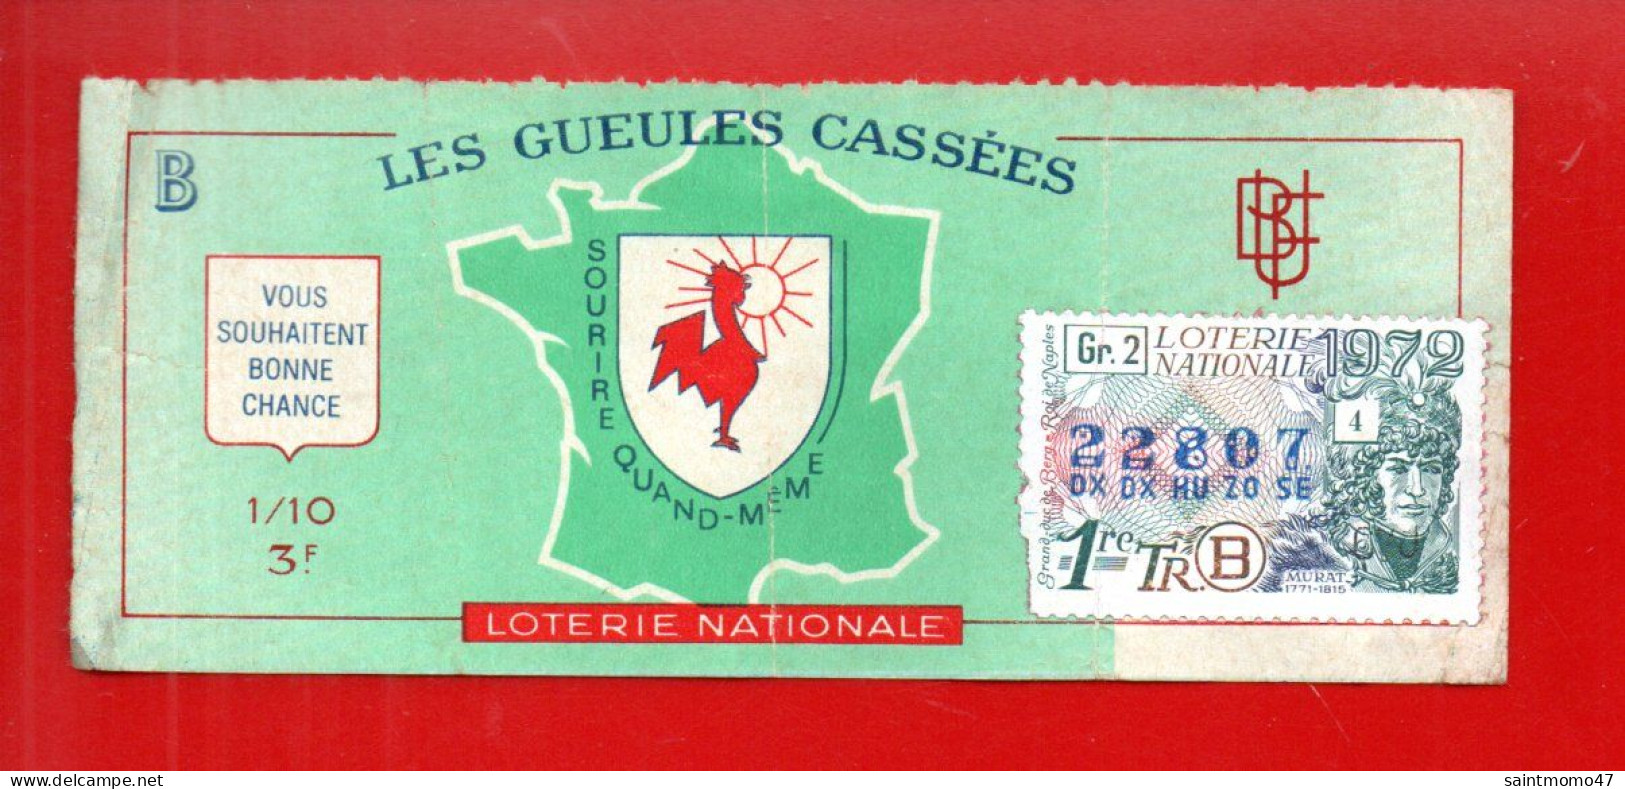 FRANCE . LOTERIE NATIONALE . " LES GUEULES CASSÉES " - Ref. N°13026 - - Lottery Tickets